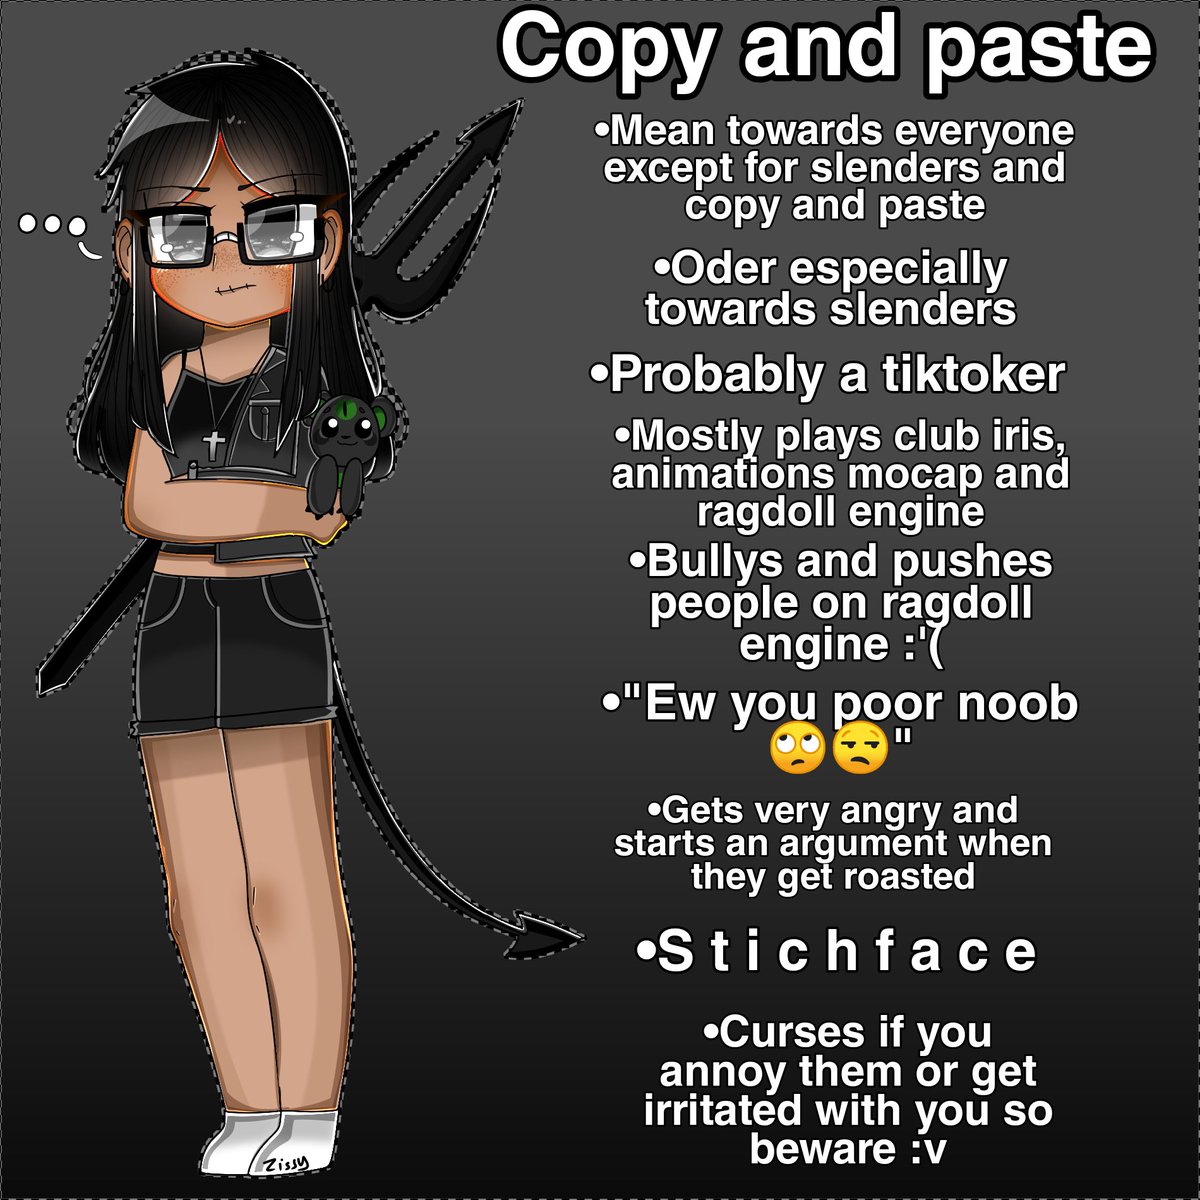 Zissy On Twitter Roblox Stereotype Outfits 1 Copy And Paste Art By Me If Your A Copy And Paste And Say I Don T Do Those Stuff Just A Reminder Not Every Copy - faces to copy and paste on roblox